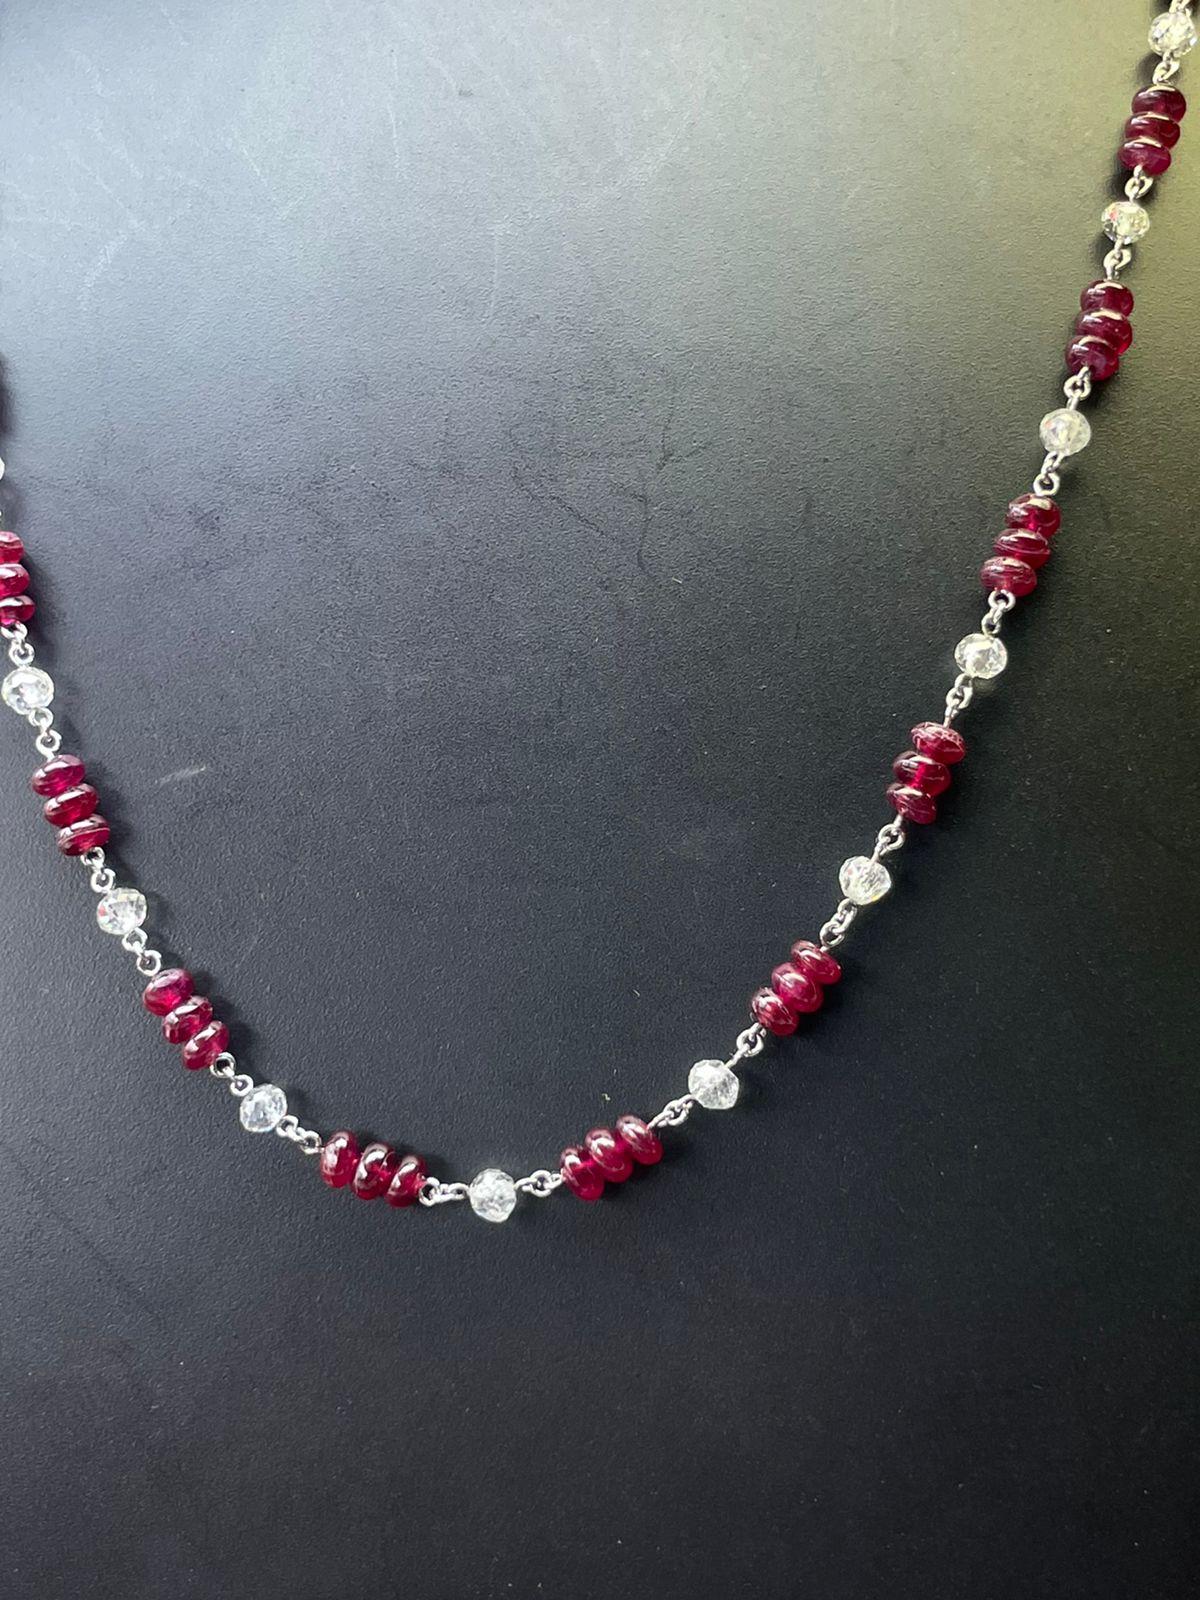 PANIM  18k White Gold Diamond Beads & Ruby Necklace In New Condition For Sale In Tsim Sha Tsui, Hong Kong